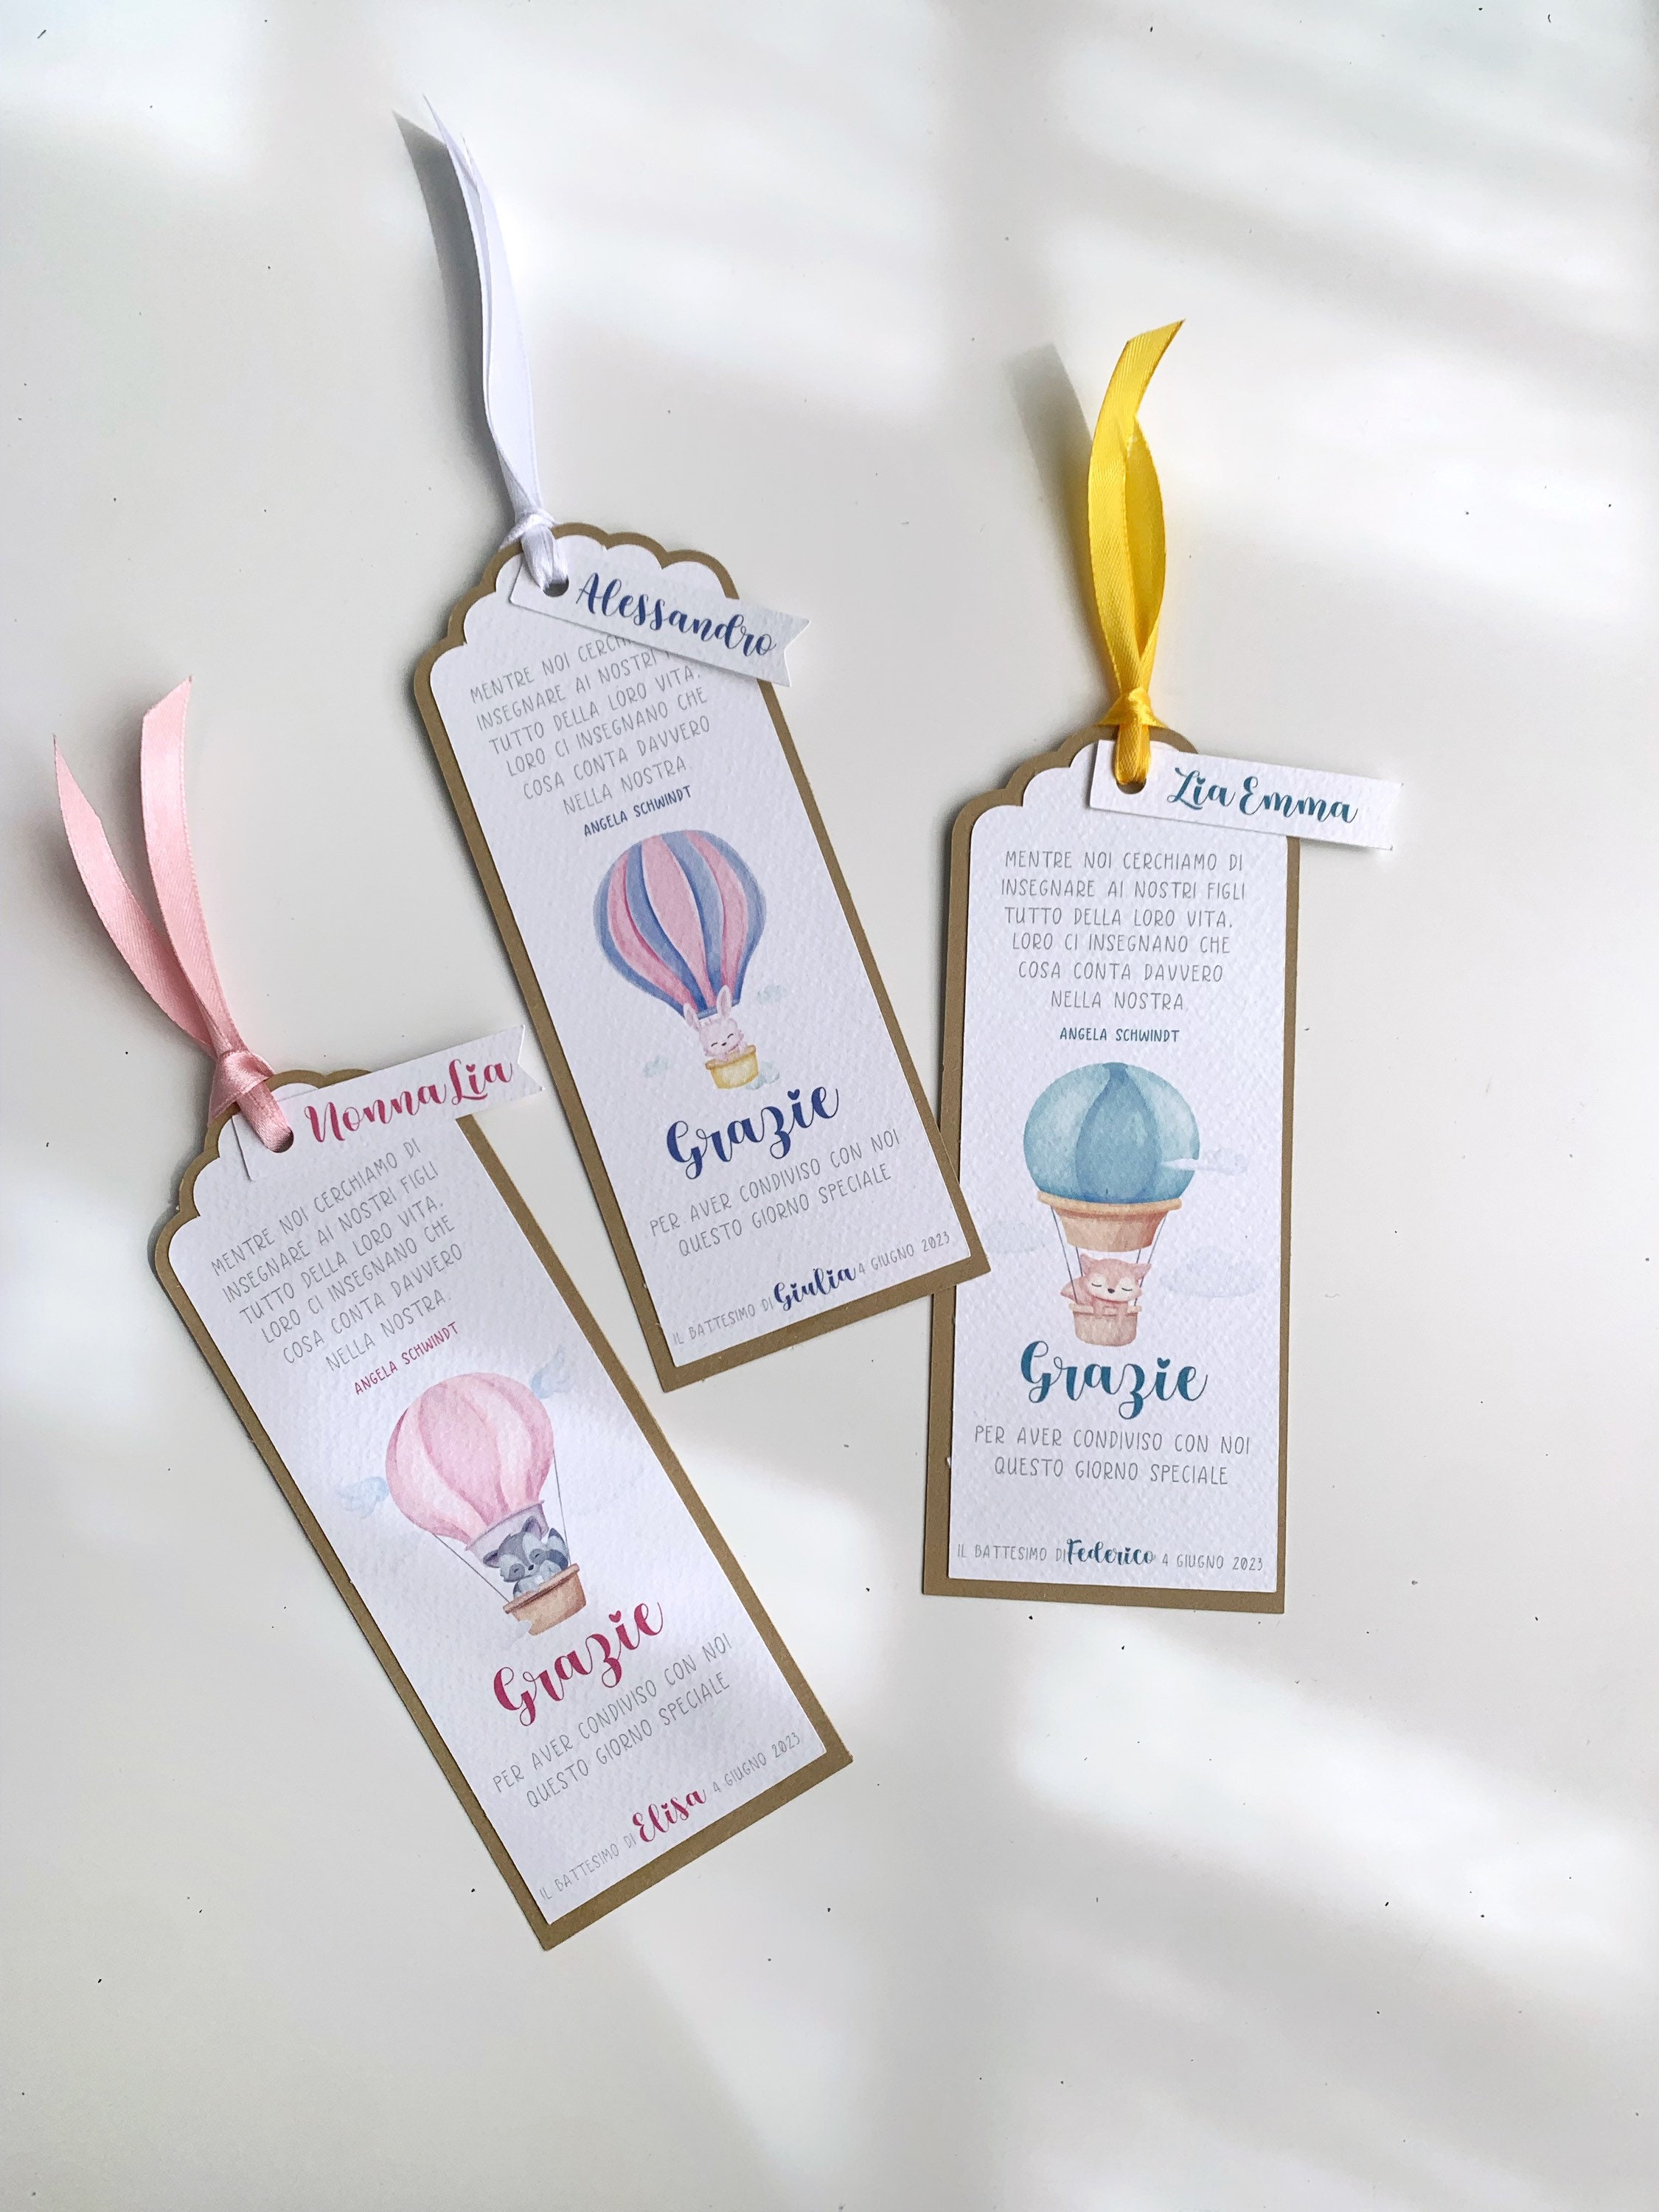 Hot Air Balloon Cross Stitch Bookmark Kit, Travel Embroidery Kit